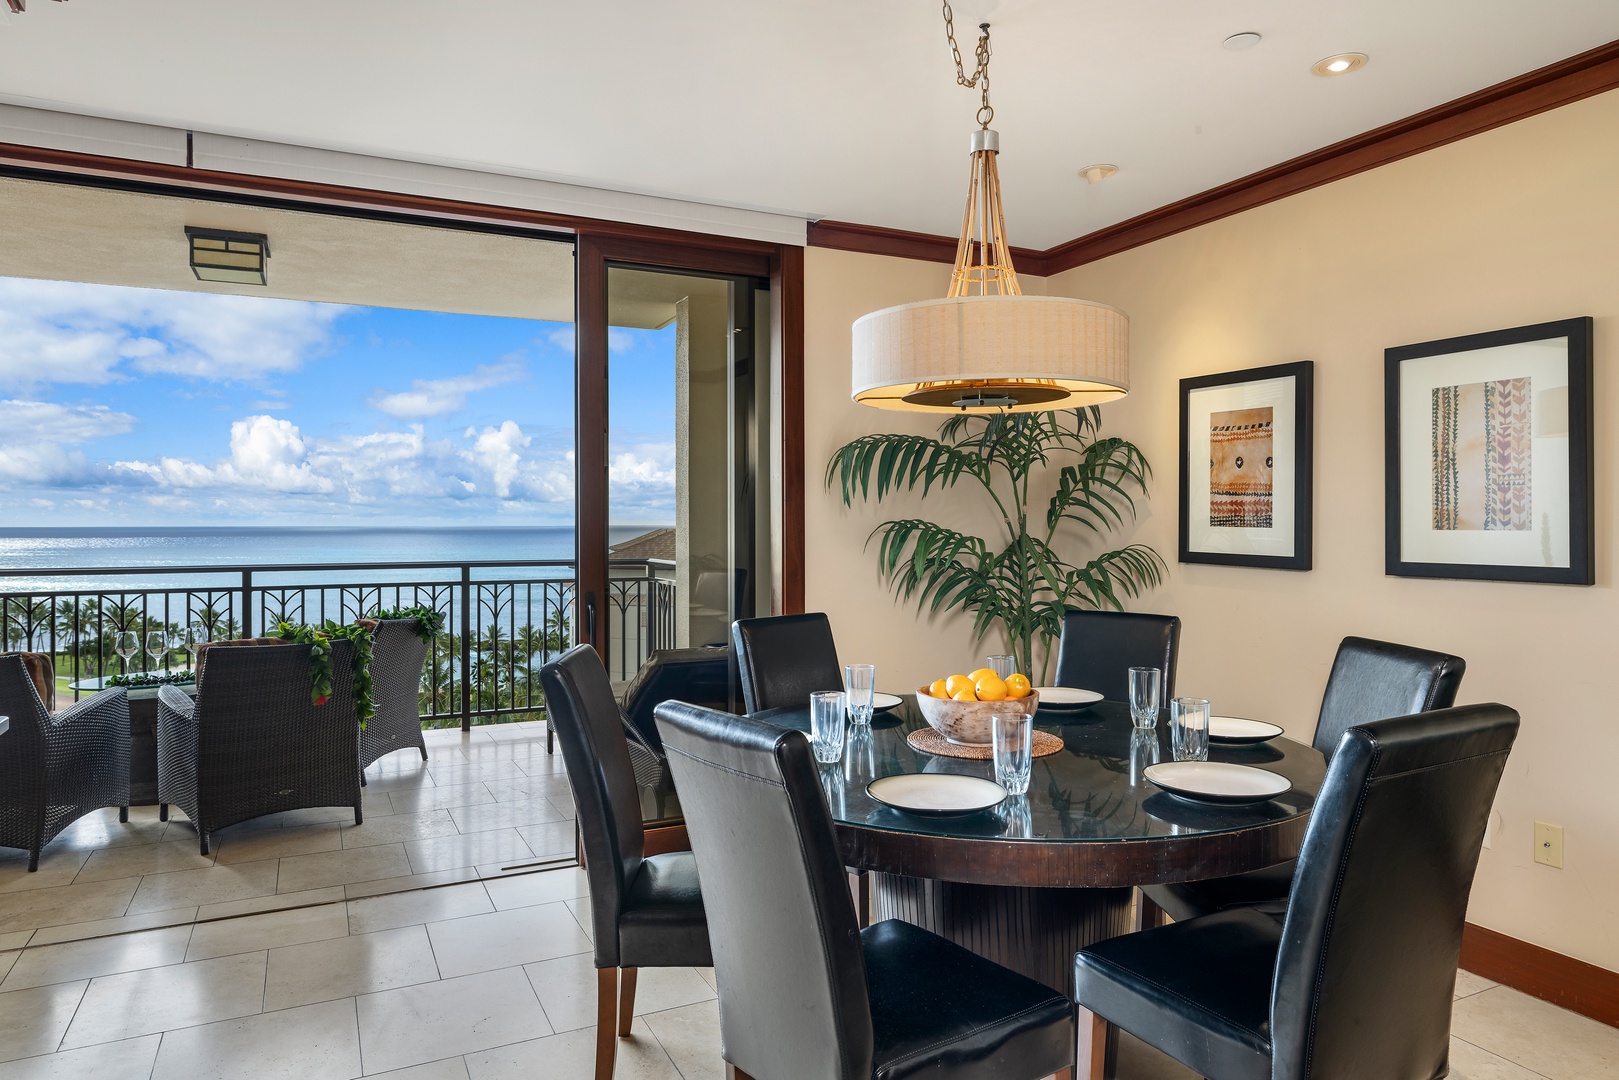 Kapolei Vacation Rentals, Ko Olina Beach Villas O1105 - The open concept design provides sunset views whether on the lanai or dining space.